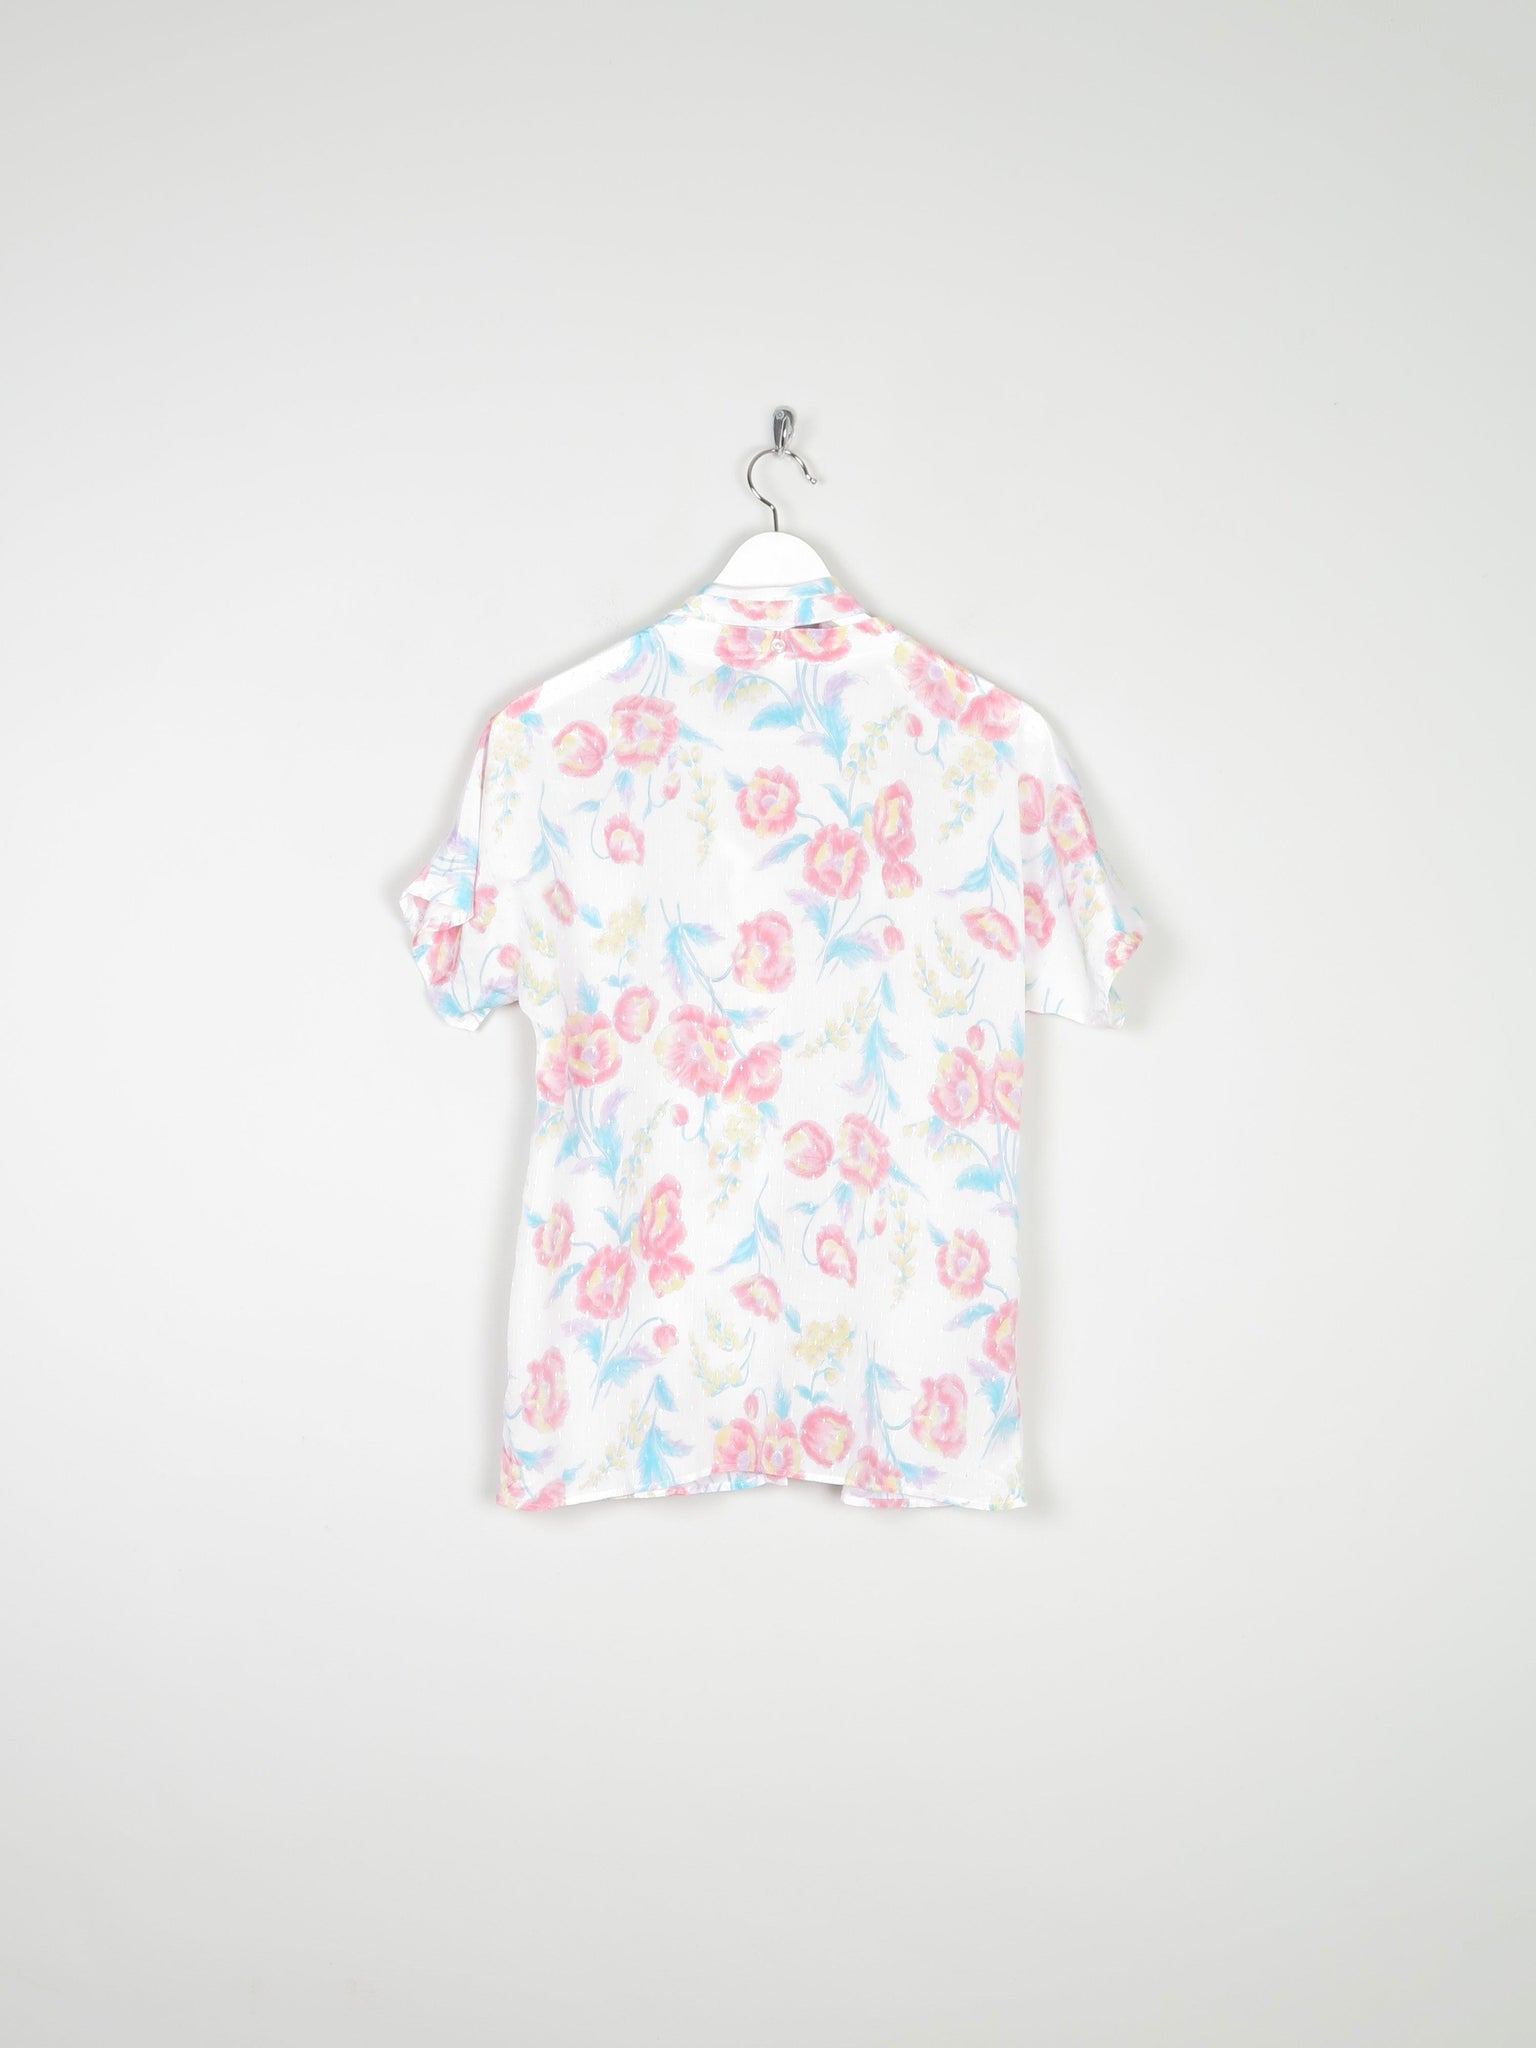 Women’s Floral Short-Sleeved Blouse With Tie Neck S - The Harlequin